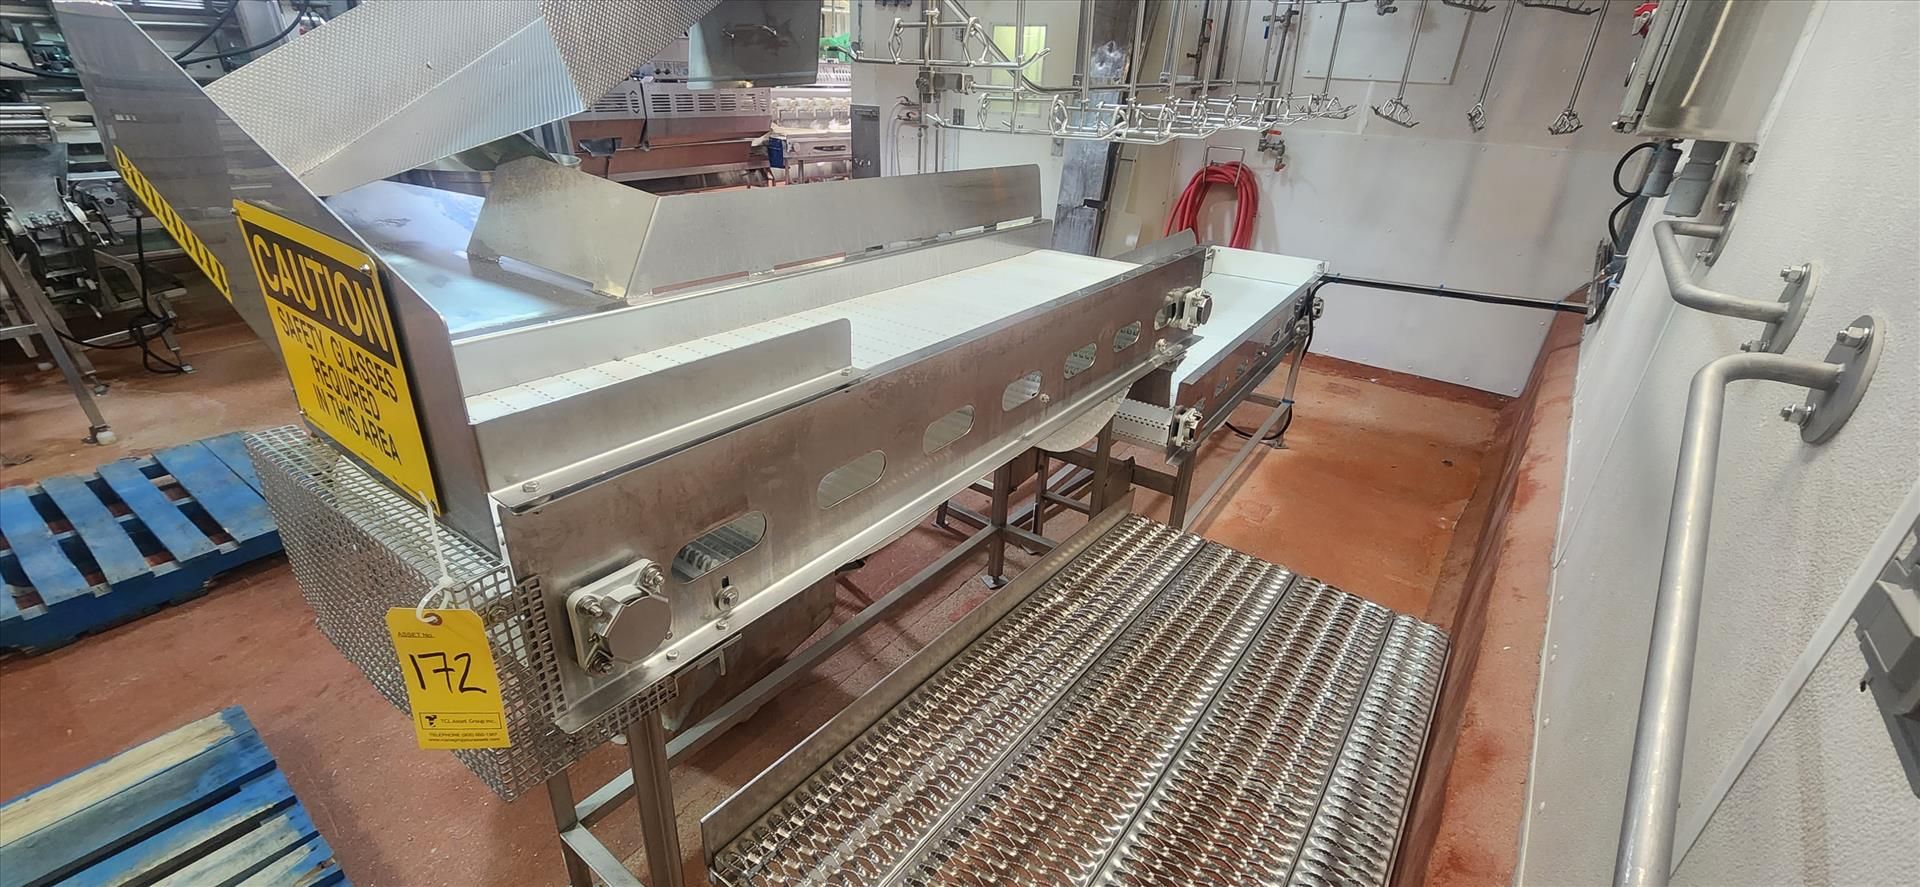 (2) conveyors, belt, stainless steel frame, (1) wash down motor, approx. 18 in. x 6 ft. ea. [Loc.